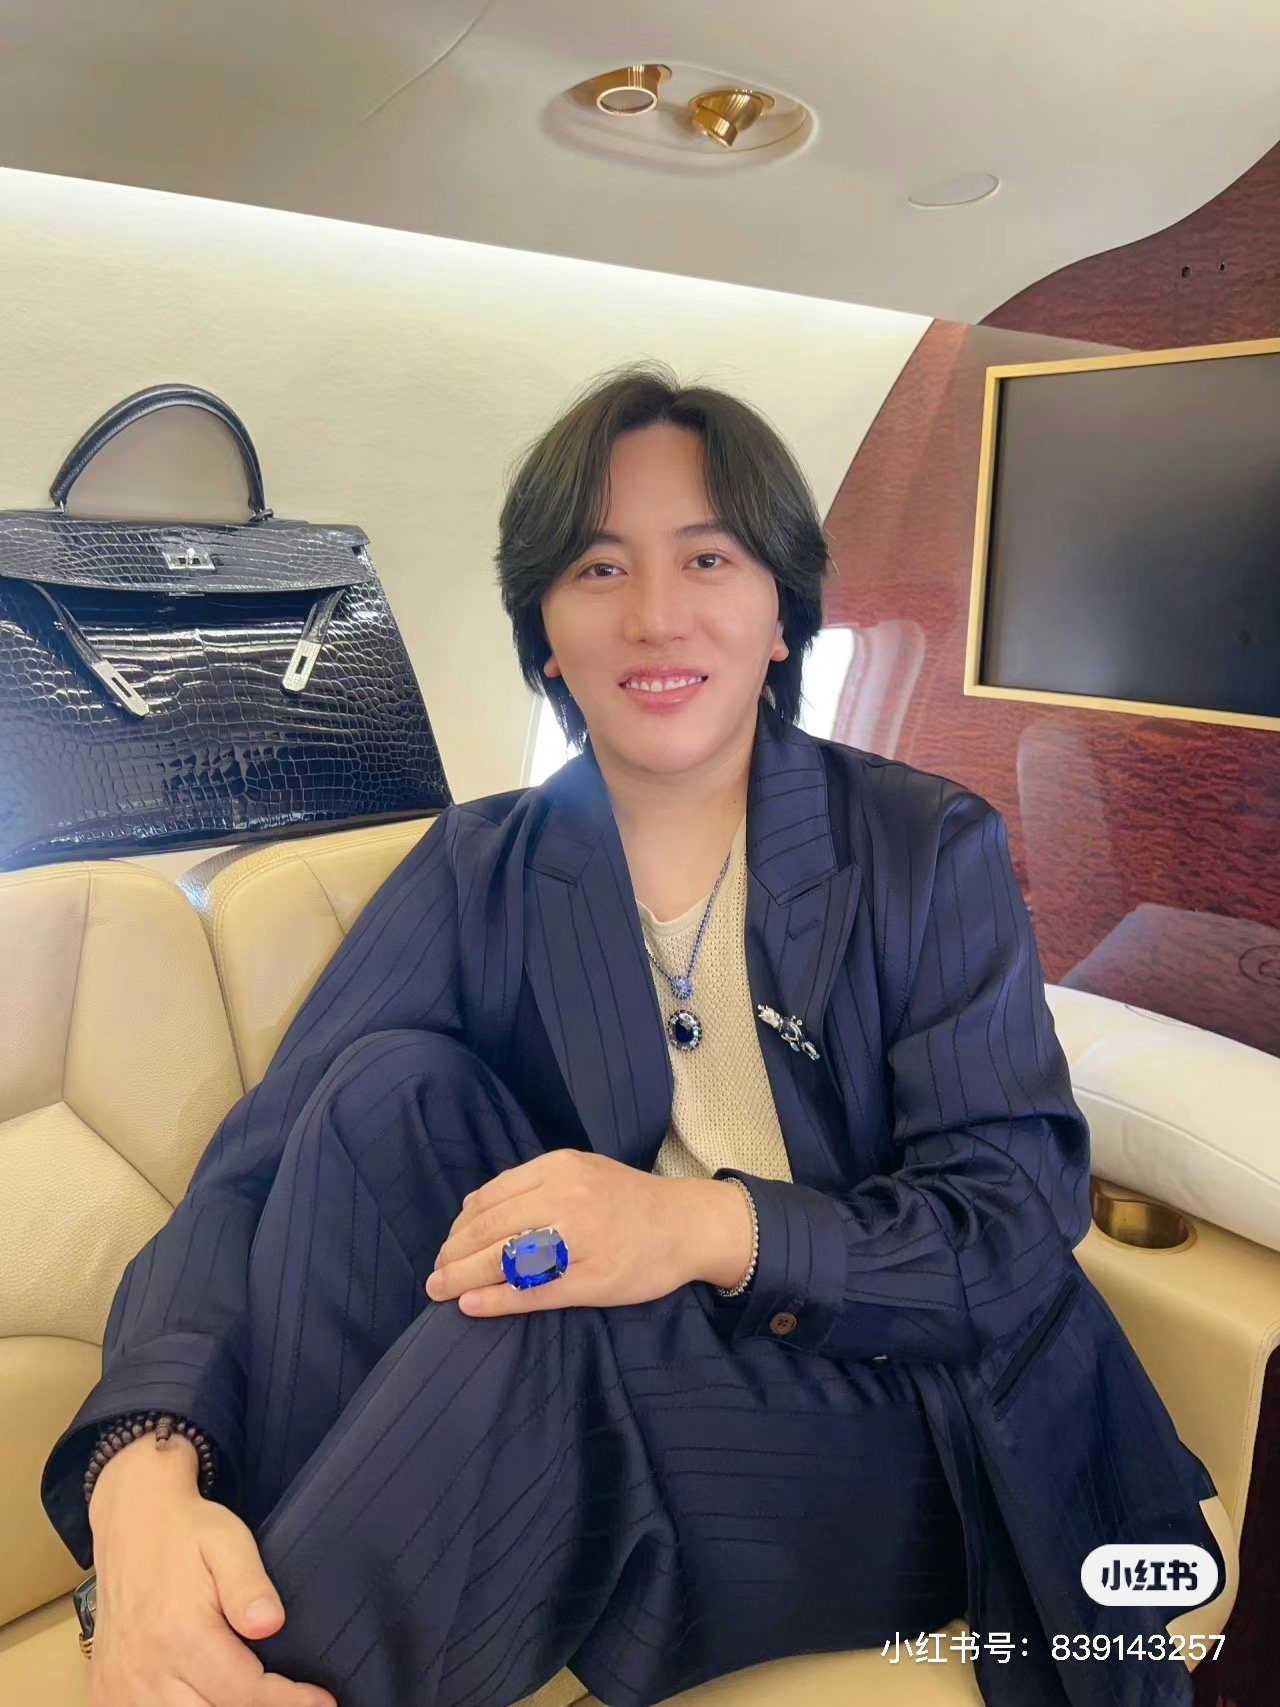 An avid collector of diamond and green emerald jewelry as well as Hermès bags, Wanghong Quanxing (@王红权星) is a member of Beijing’s socialite scene. Image: @王红权星